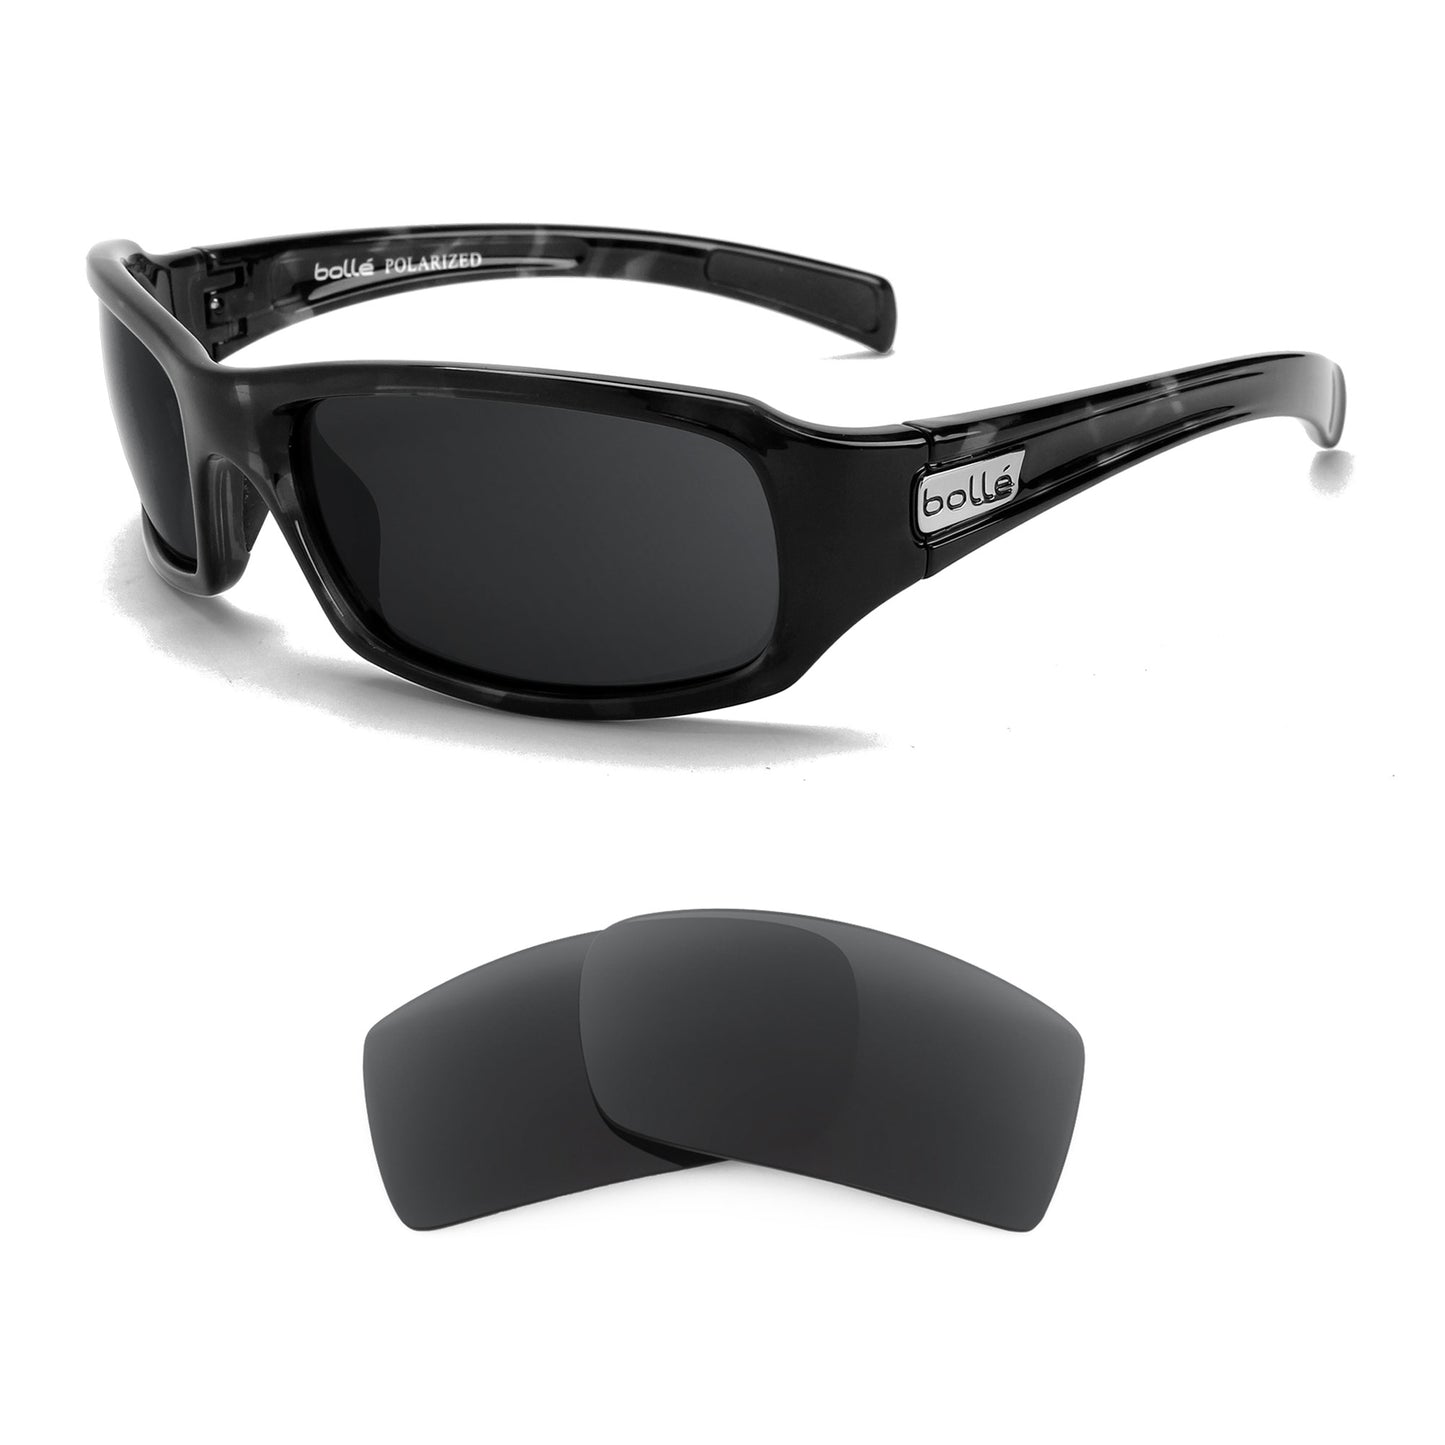 Bolle Phoenix sunglasses with replacement lenses